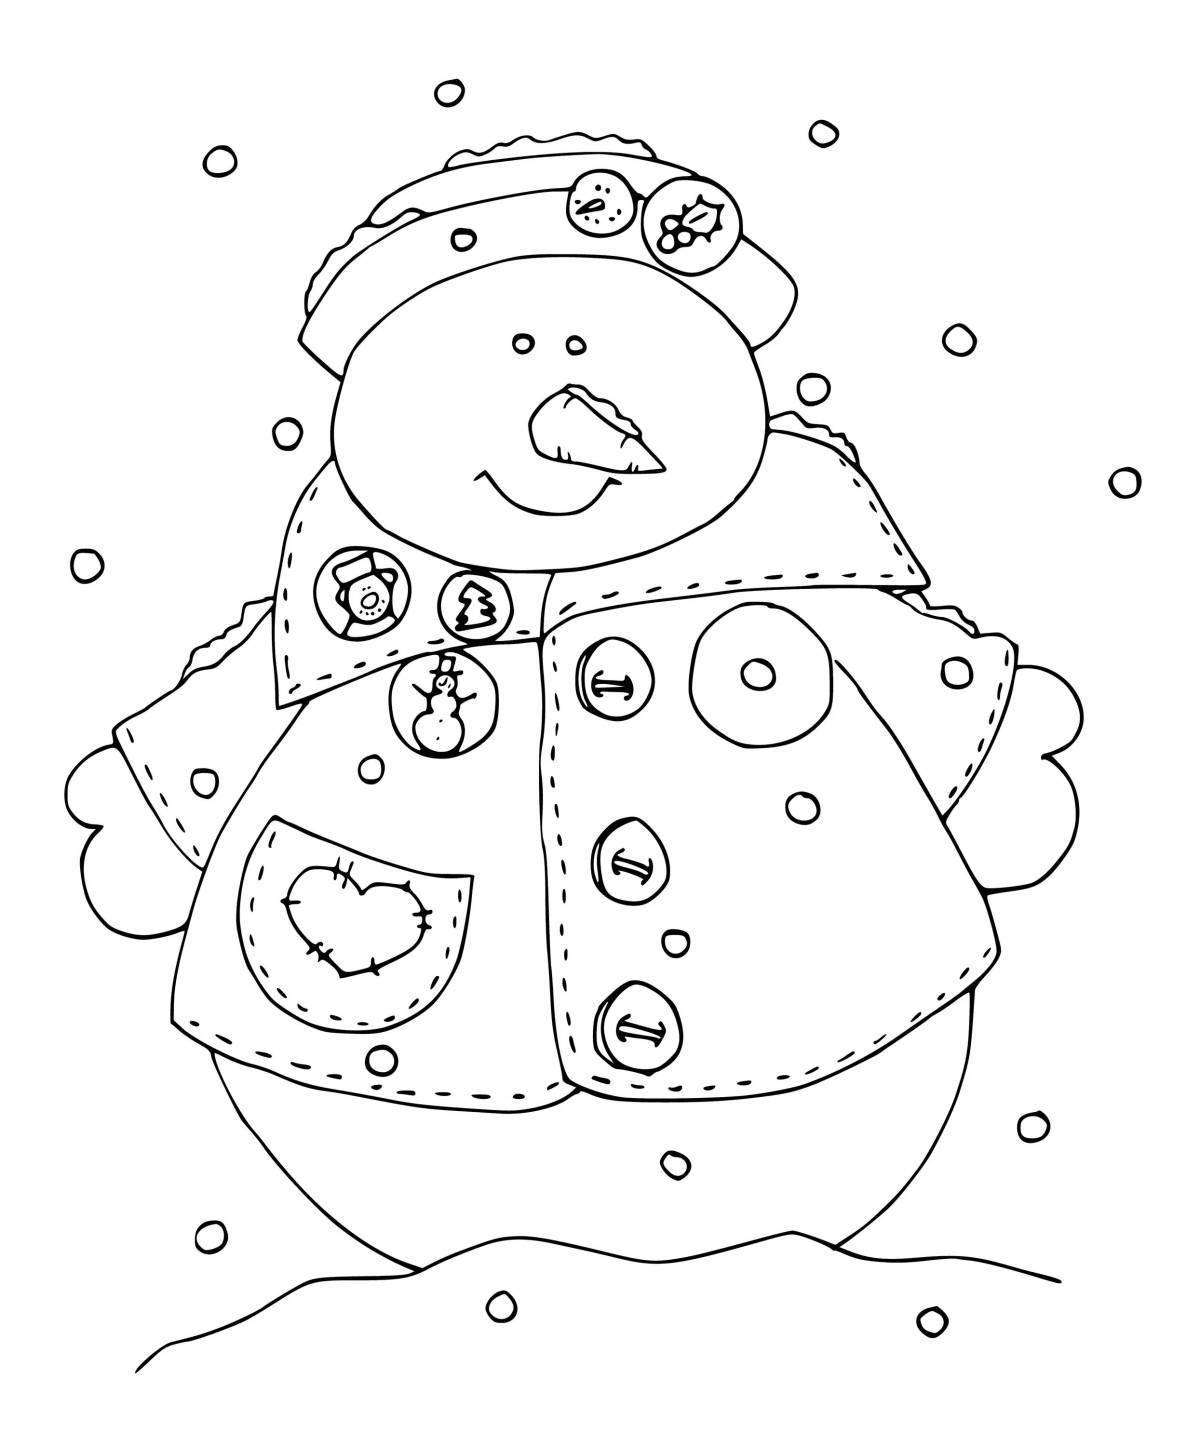 Coloring page of a cheerful snowman girl